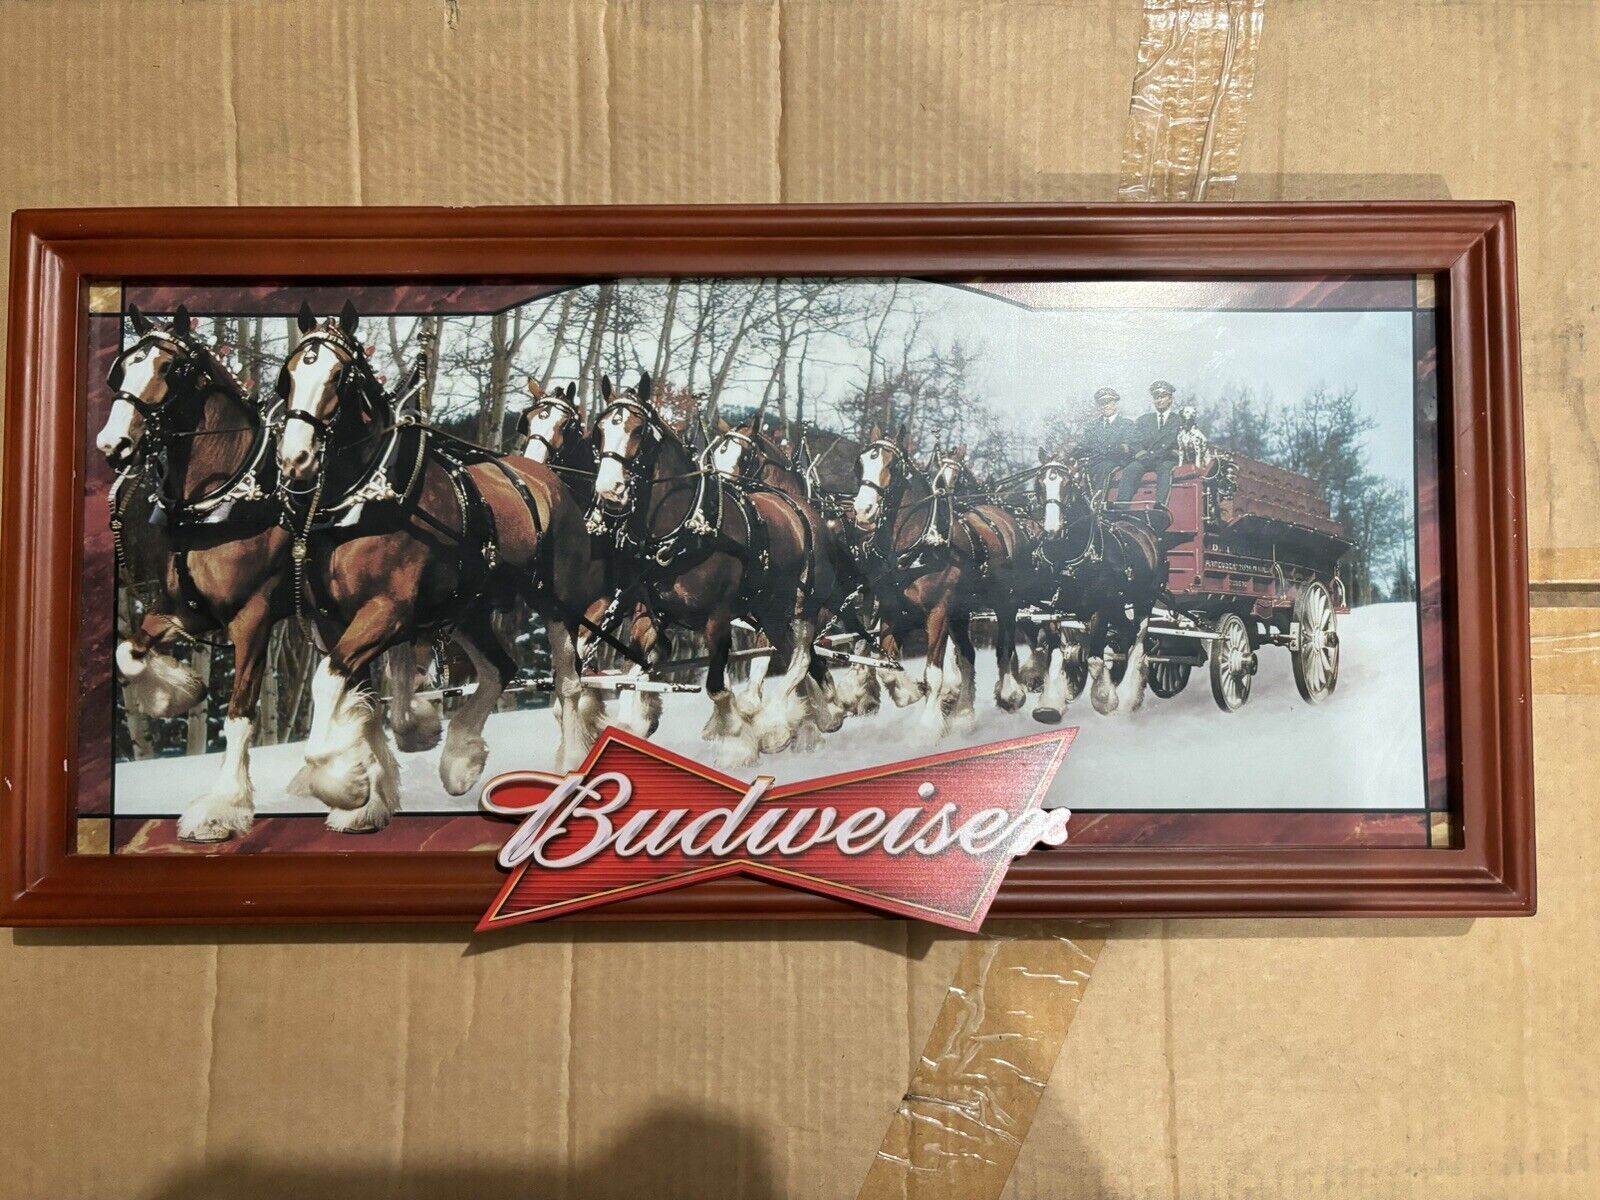 Budweiser Clydesdales Bradford Exchange A2261 Beer Sign 2010 Limited Edition